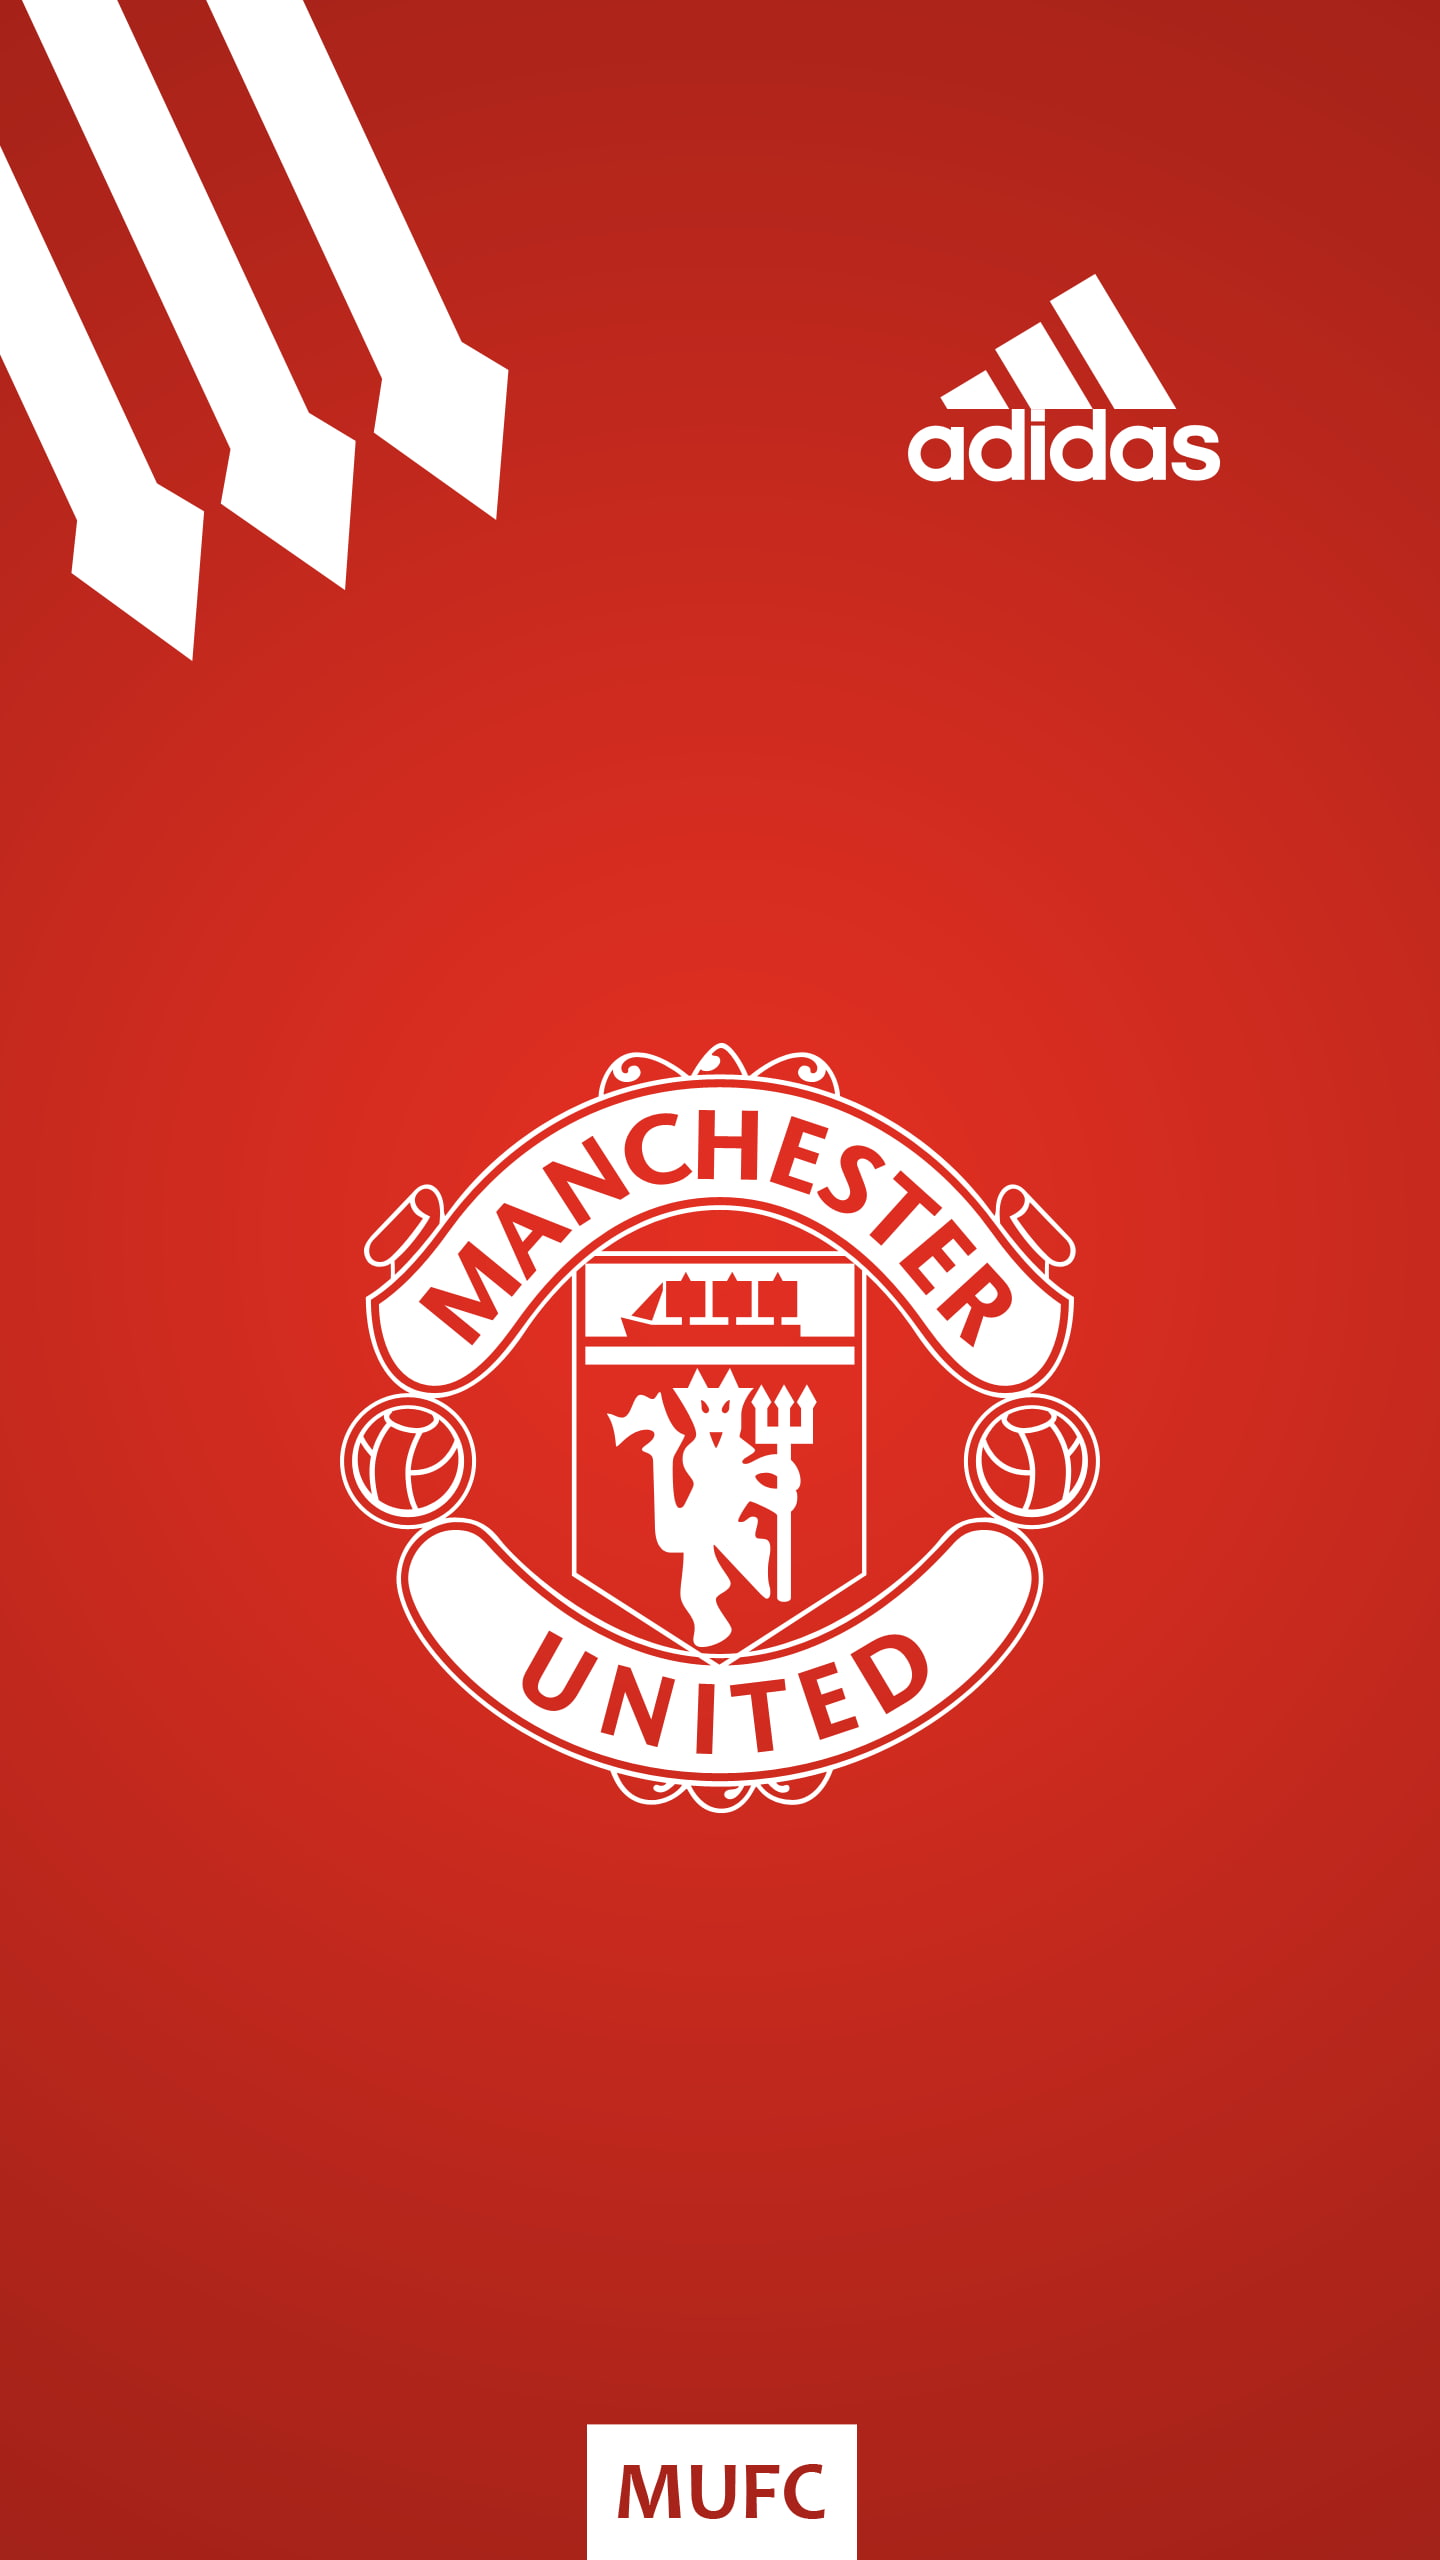 Manchester United, Football, logo, simple background, red devil